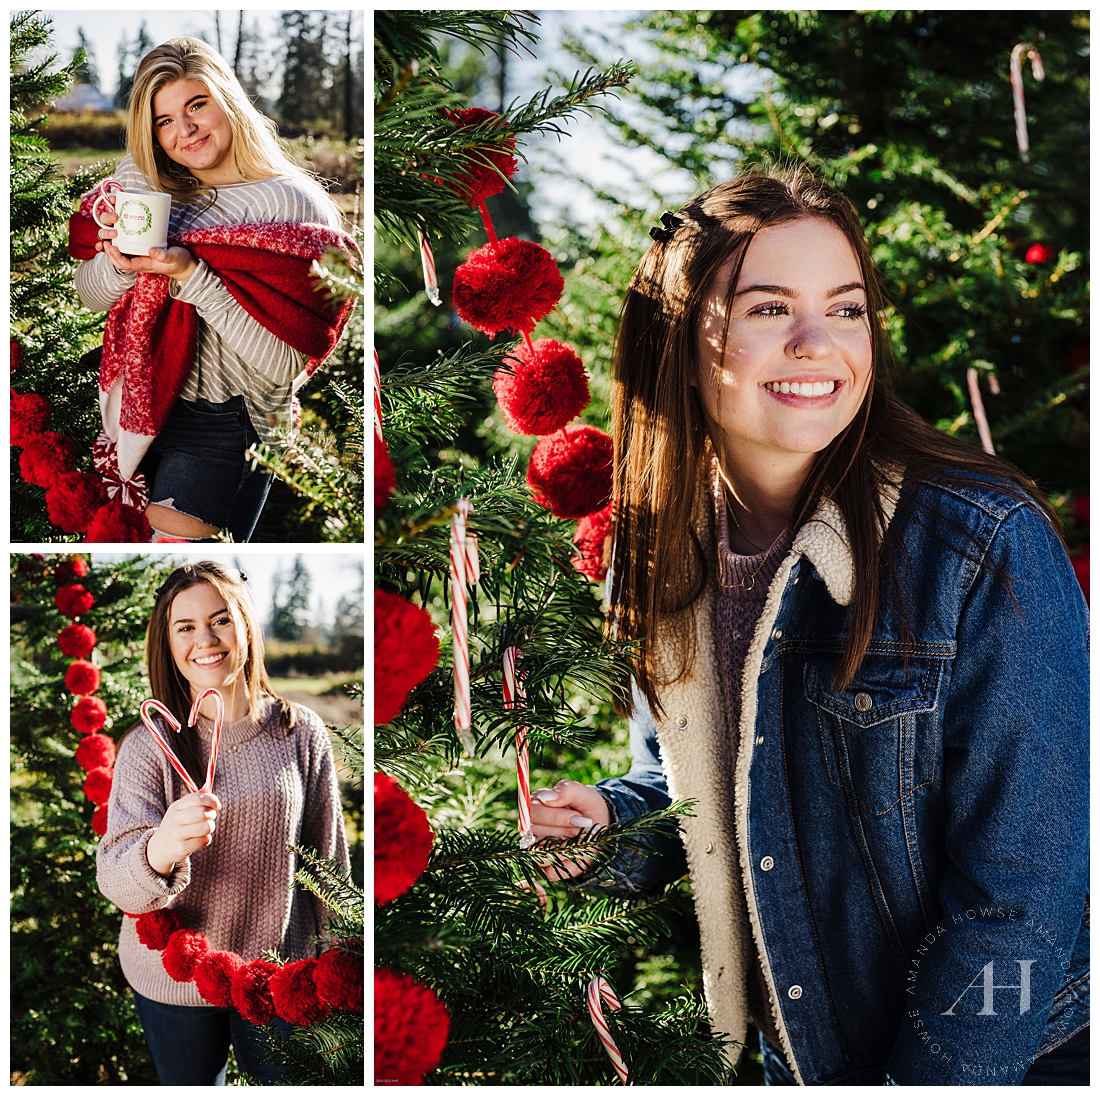 Sunny Winter Portraits at a Tree Farm | The AHP Model Team posed in front of festive holiday trees with pompom garlands at a local farm. Check it out this week on the blog. | Photographed by Tacoma Senior Portrait Photographer Amanda Howse